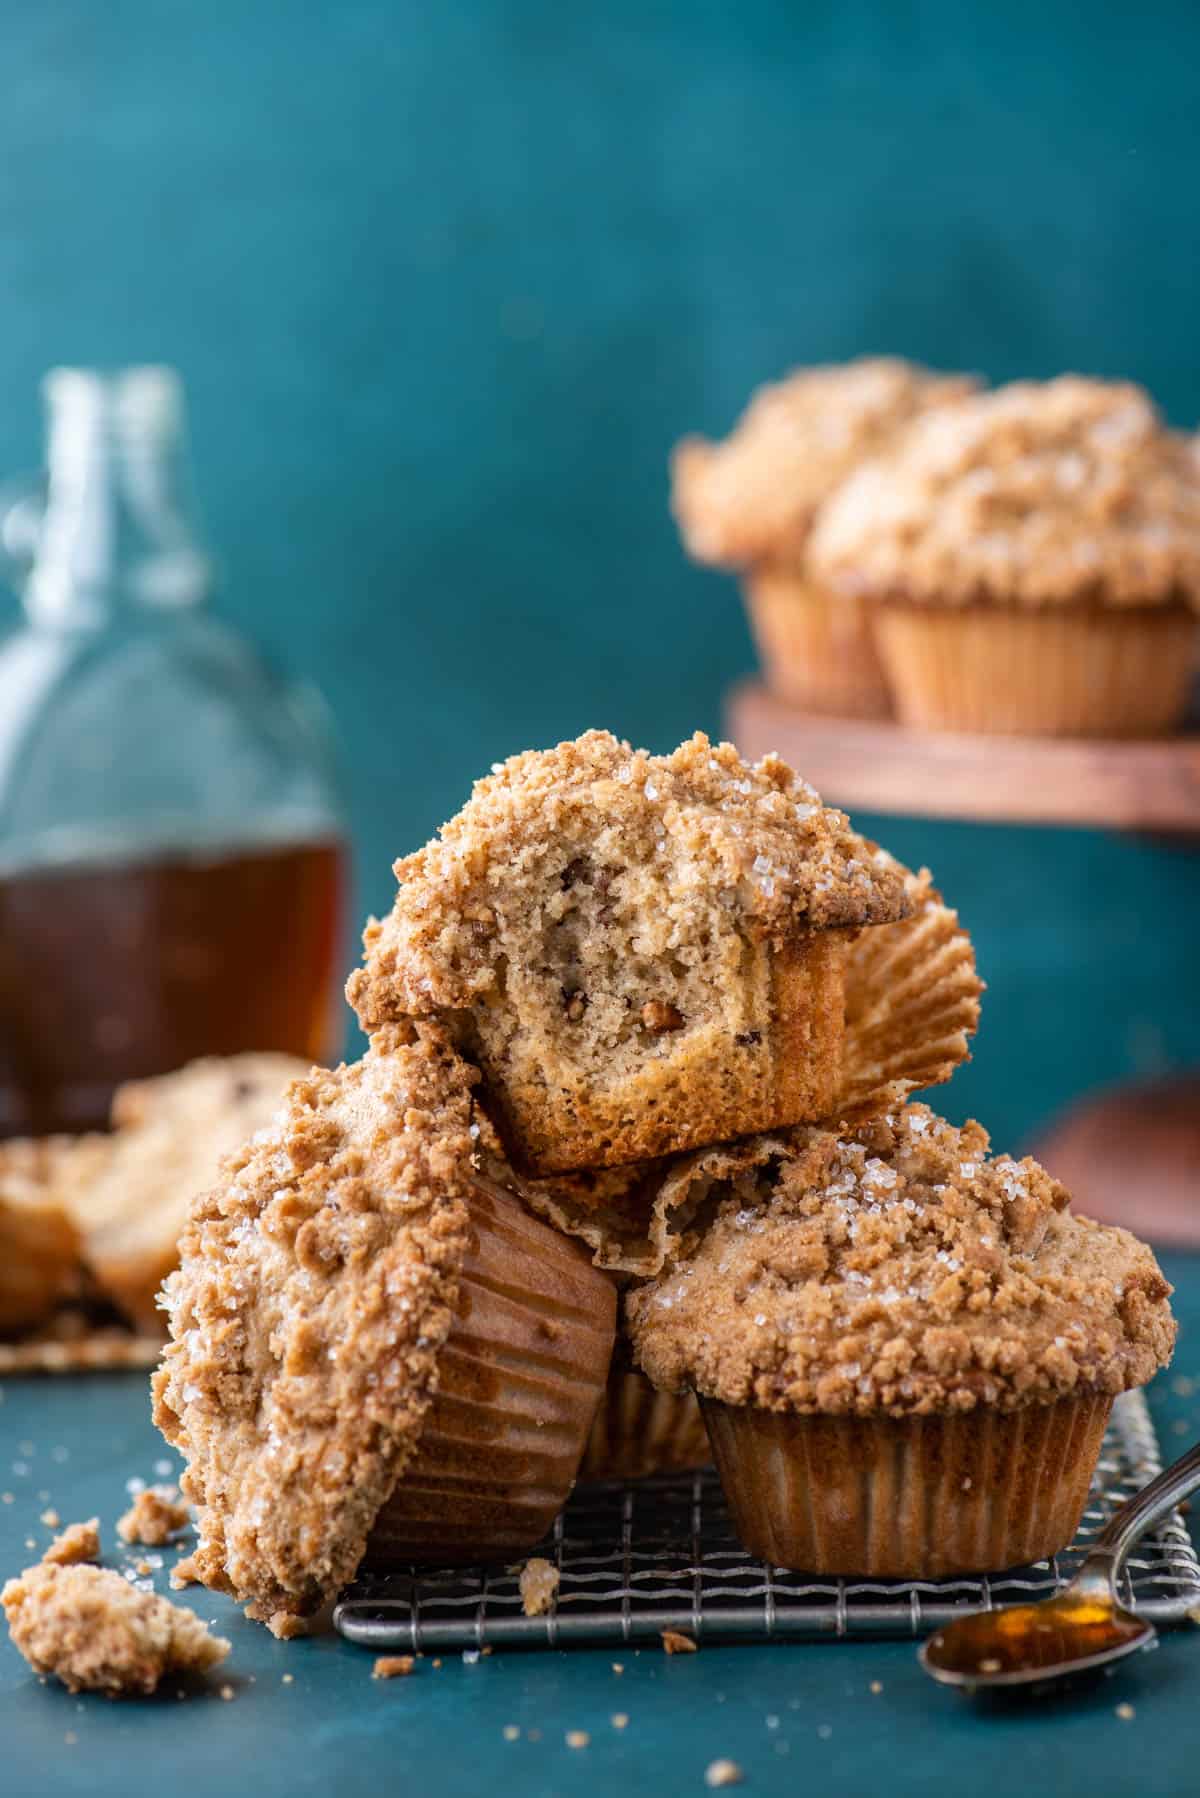 a pile of maple pecan muffins on top of a wire rack, with the top muffin missing a bite out, a spoon full of maple syrup, and more muffins and maple syrup in the background